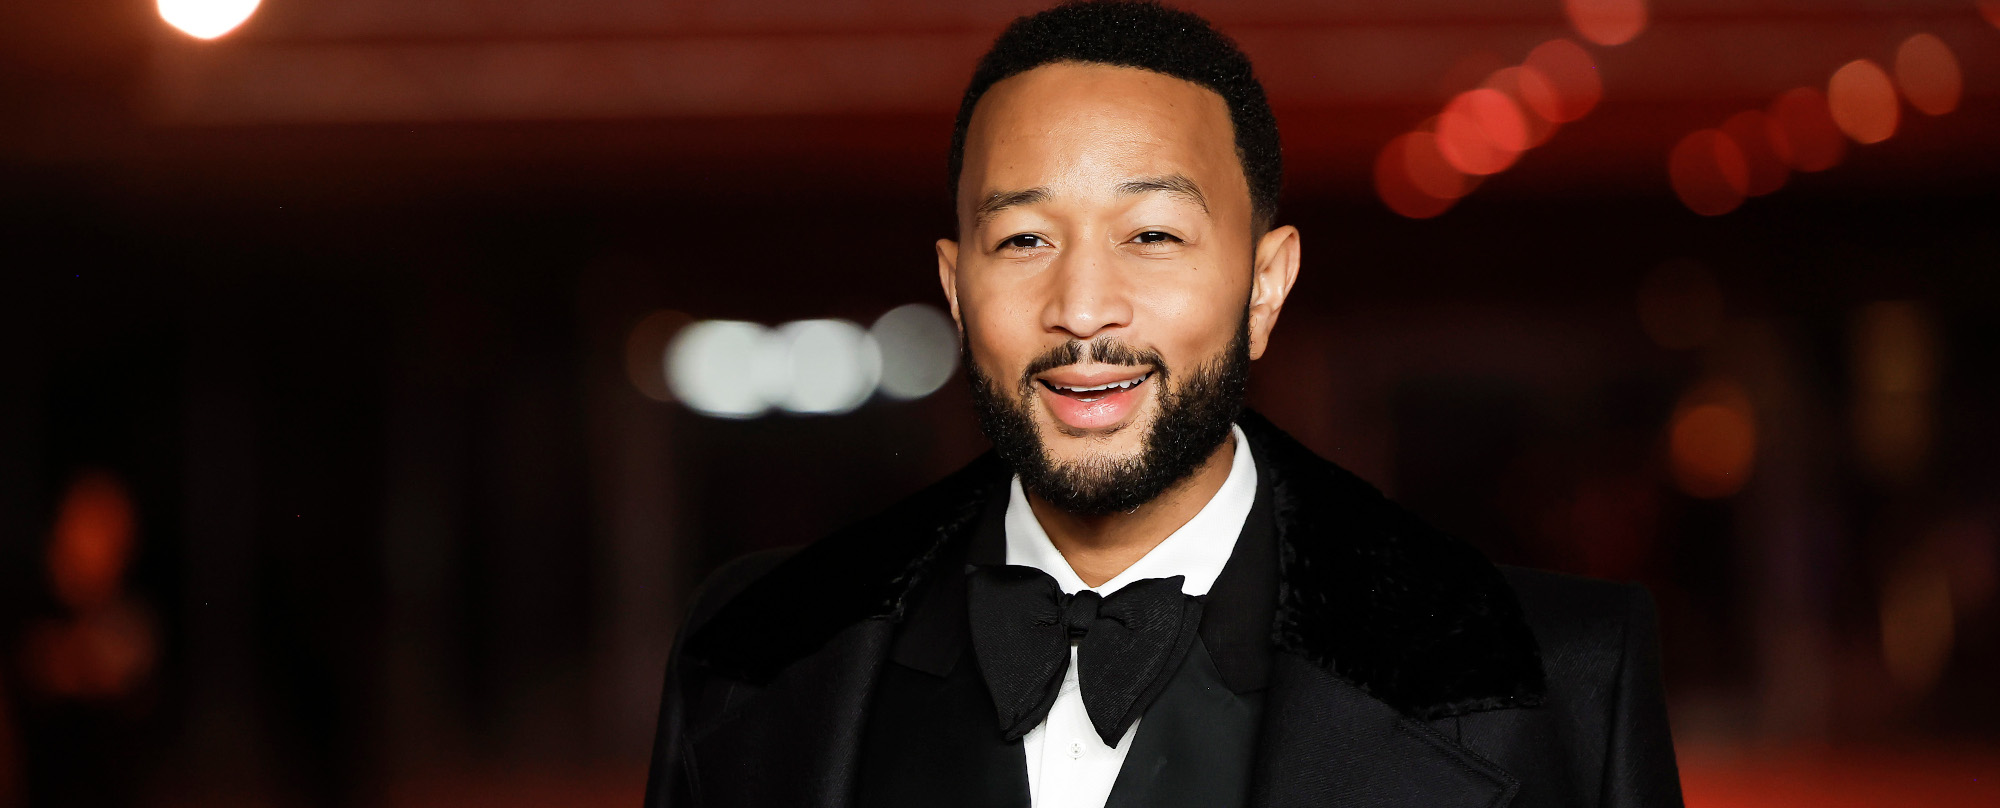 3 Smooth Songs You Didn’t Know Crooner John Legend Wrote Solo